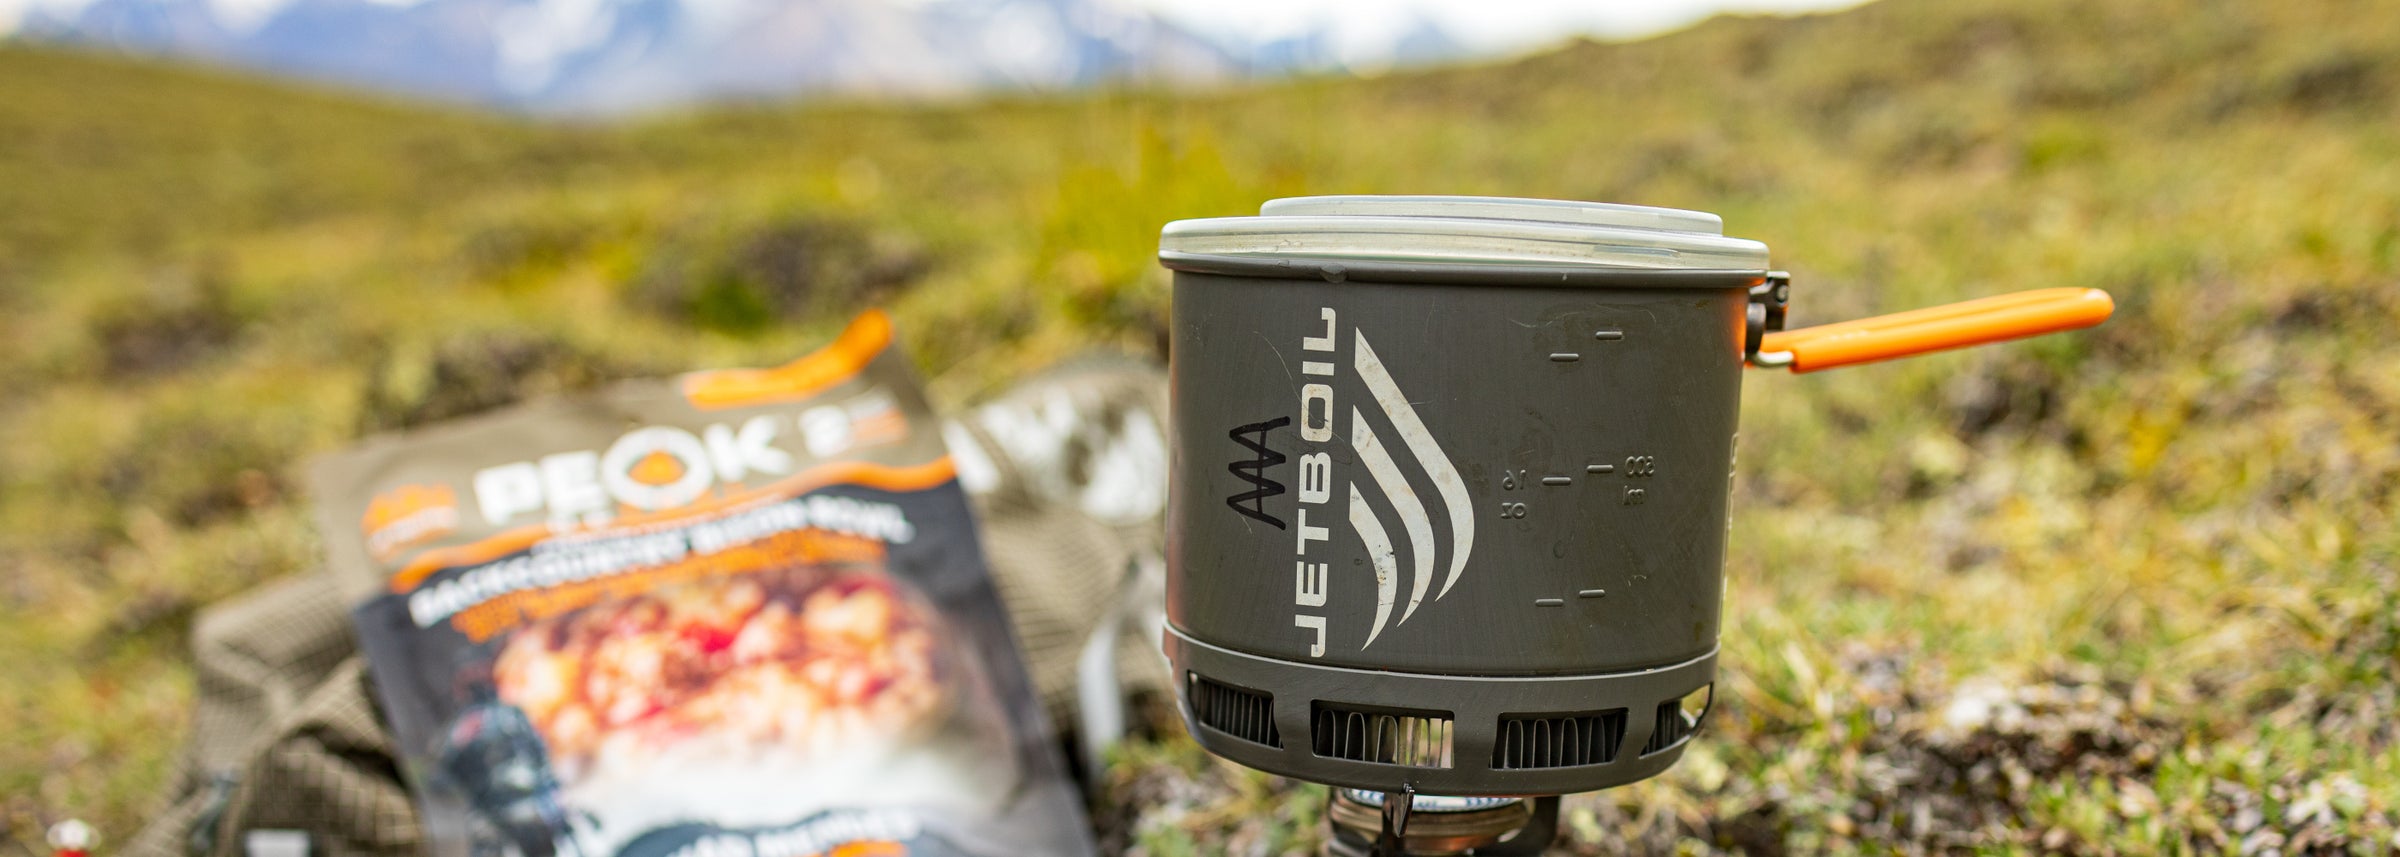 Jetboil Camping Stoves